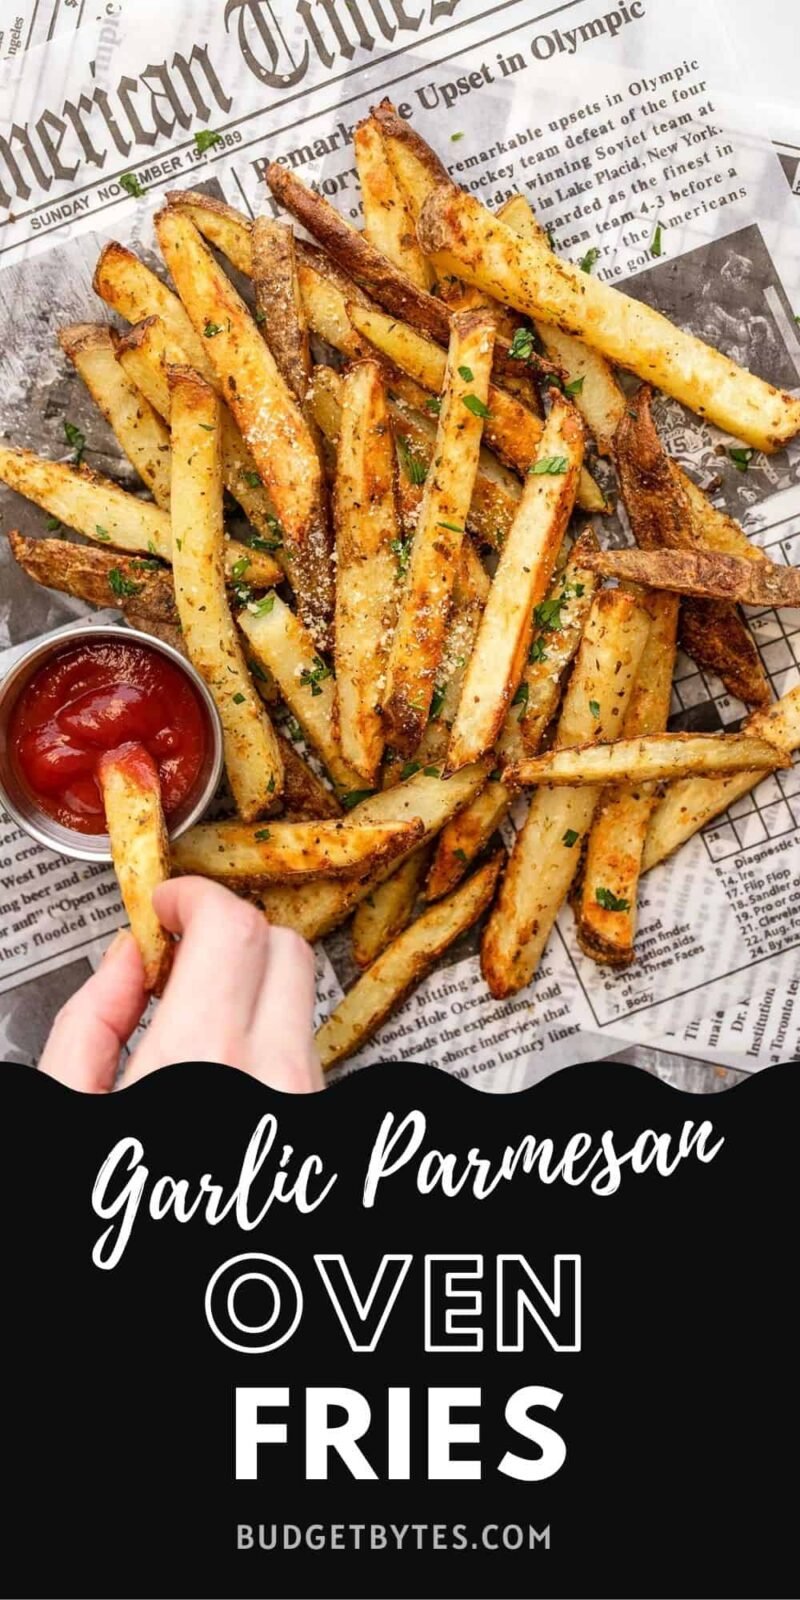 A hand dipping a garlic parmesan fry into a cup of ketchup next to a pile of fries